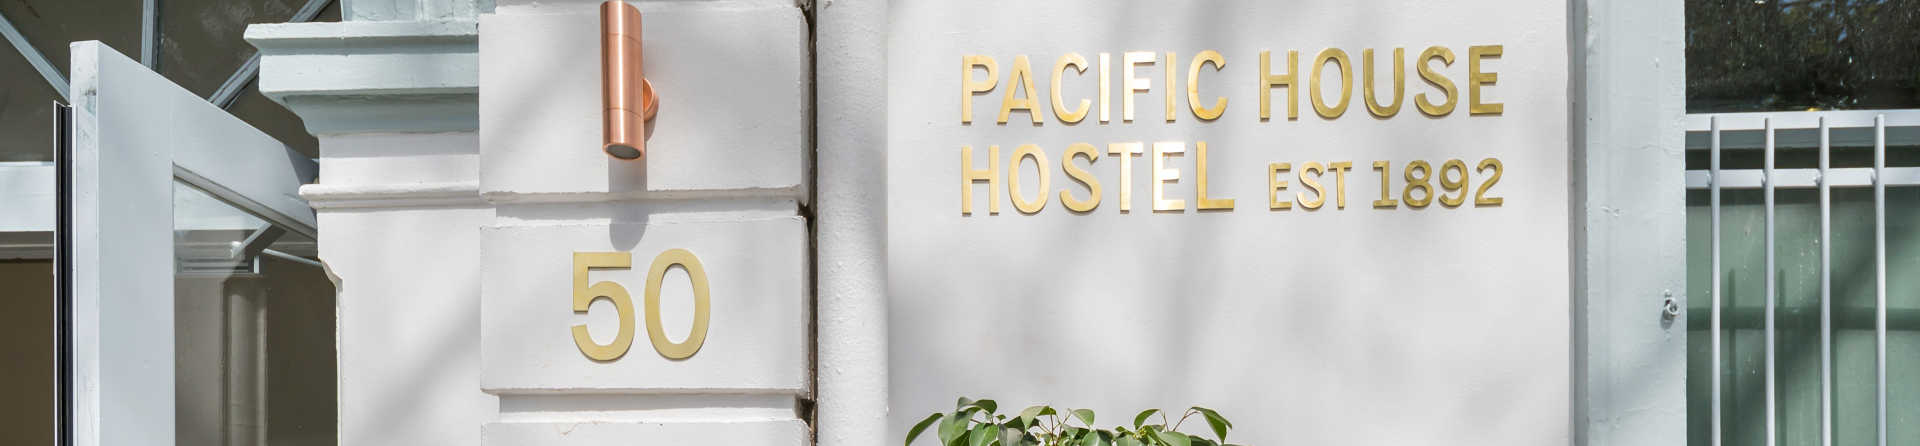 Pacific House Hostel